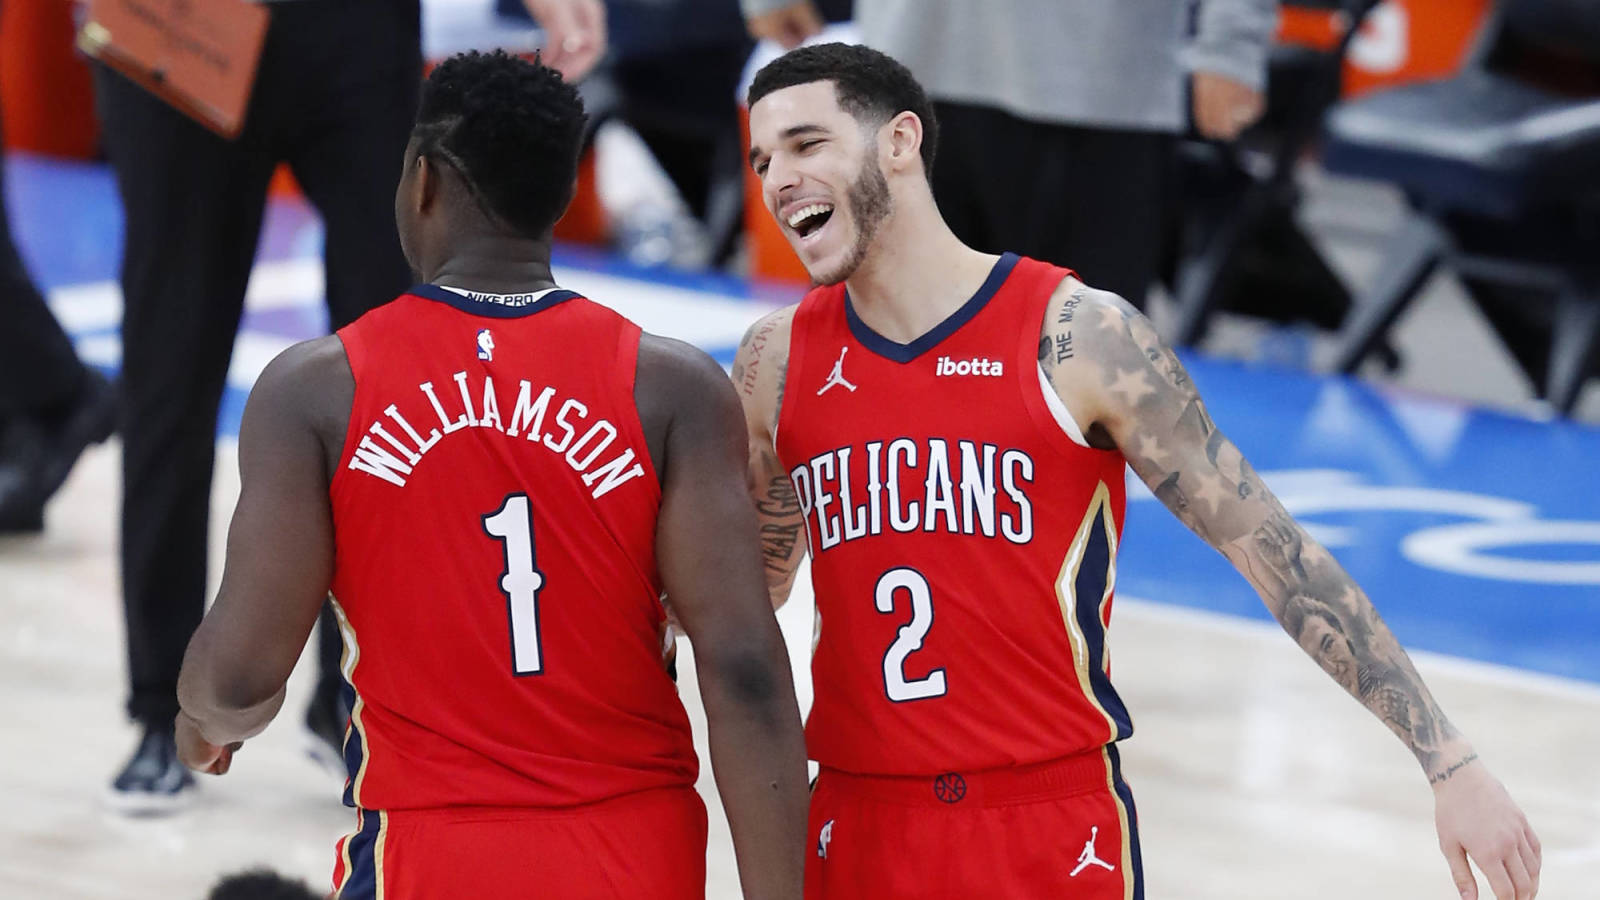 Zion Williamson praises Lonzo Ball as 'great player,' wishes he 'got the full respect he deserves'